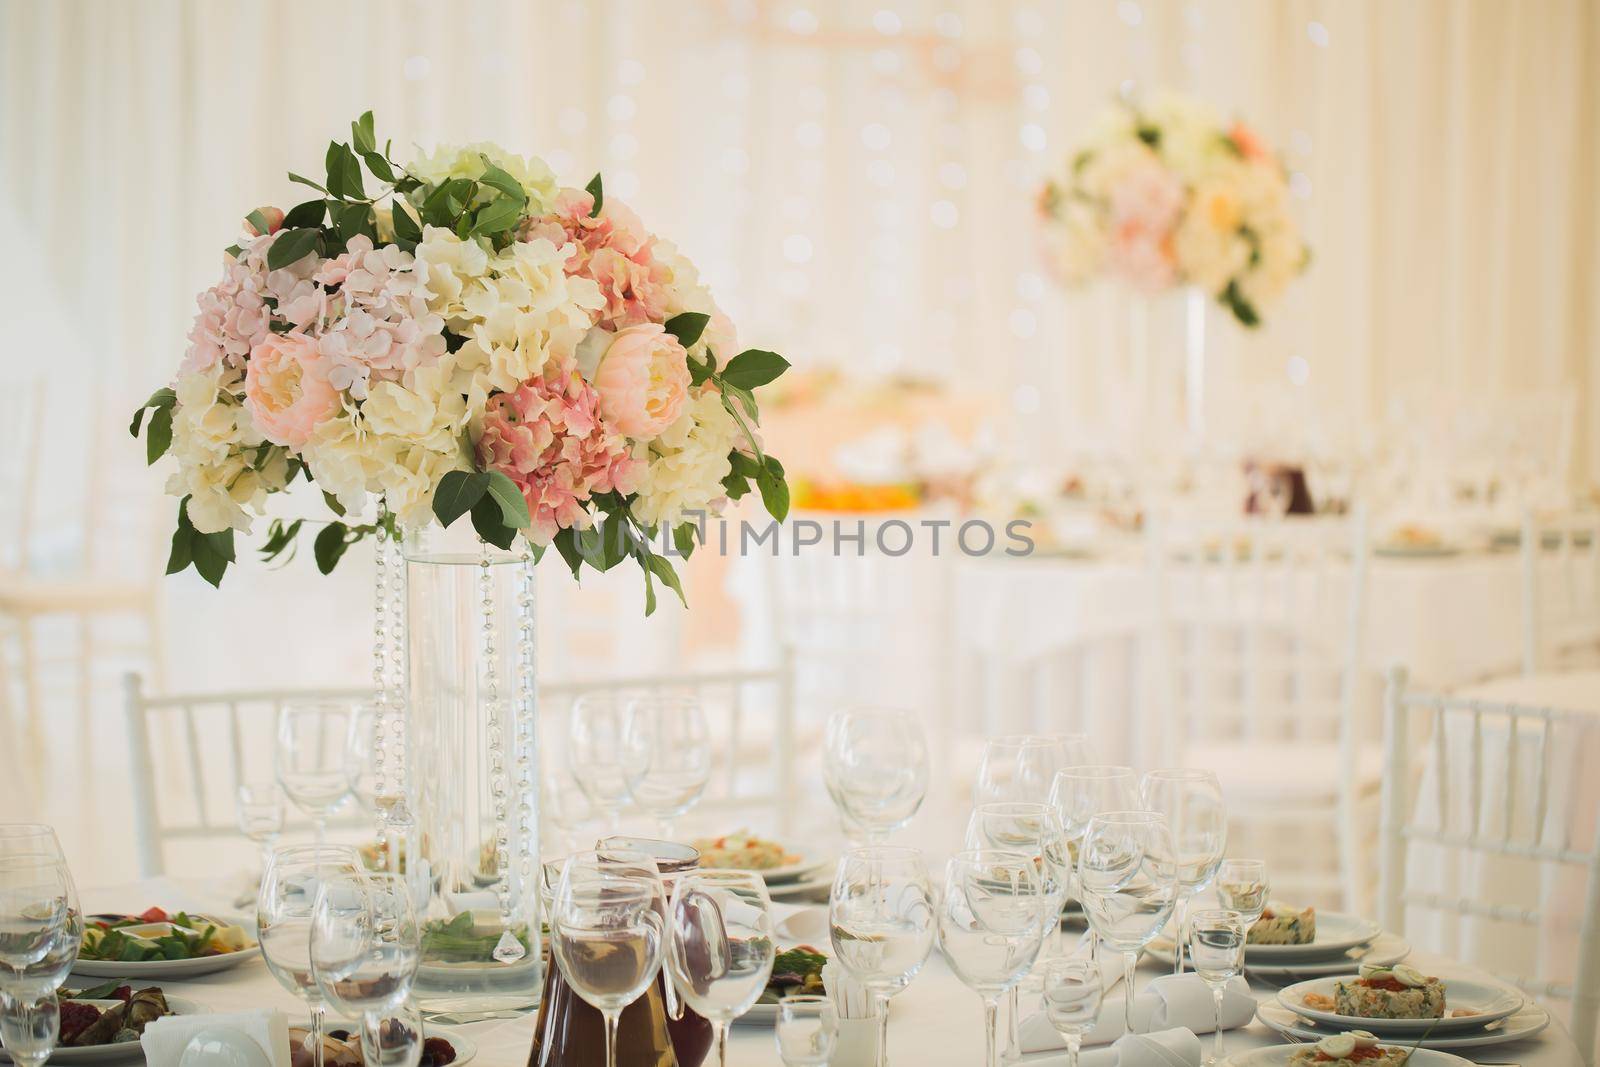 Vases with flowers on the wedding table.